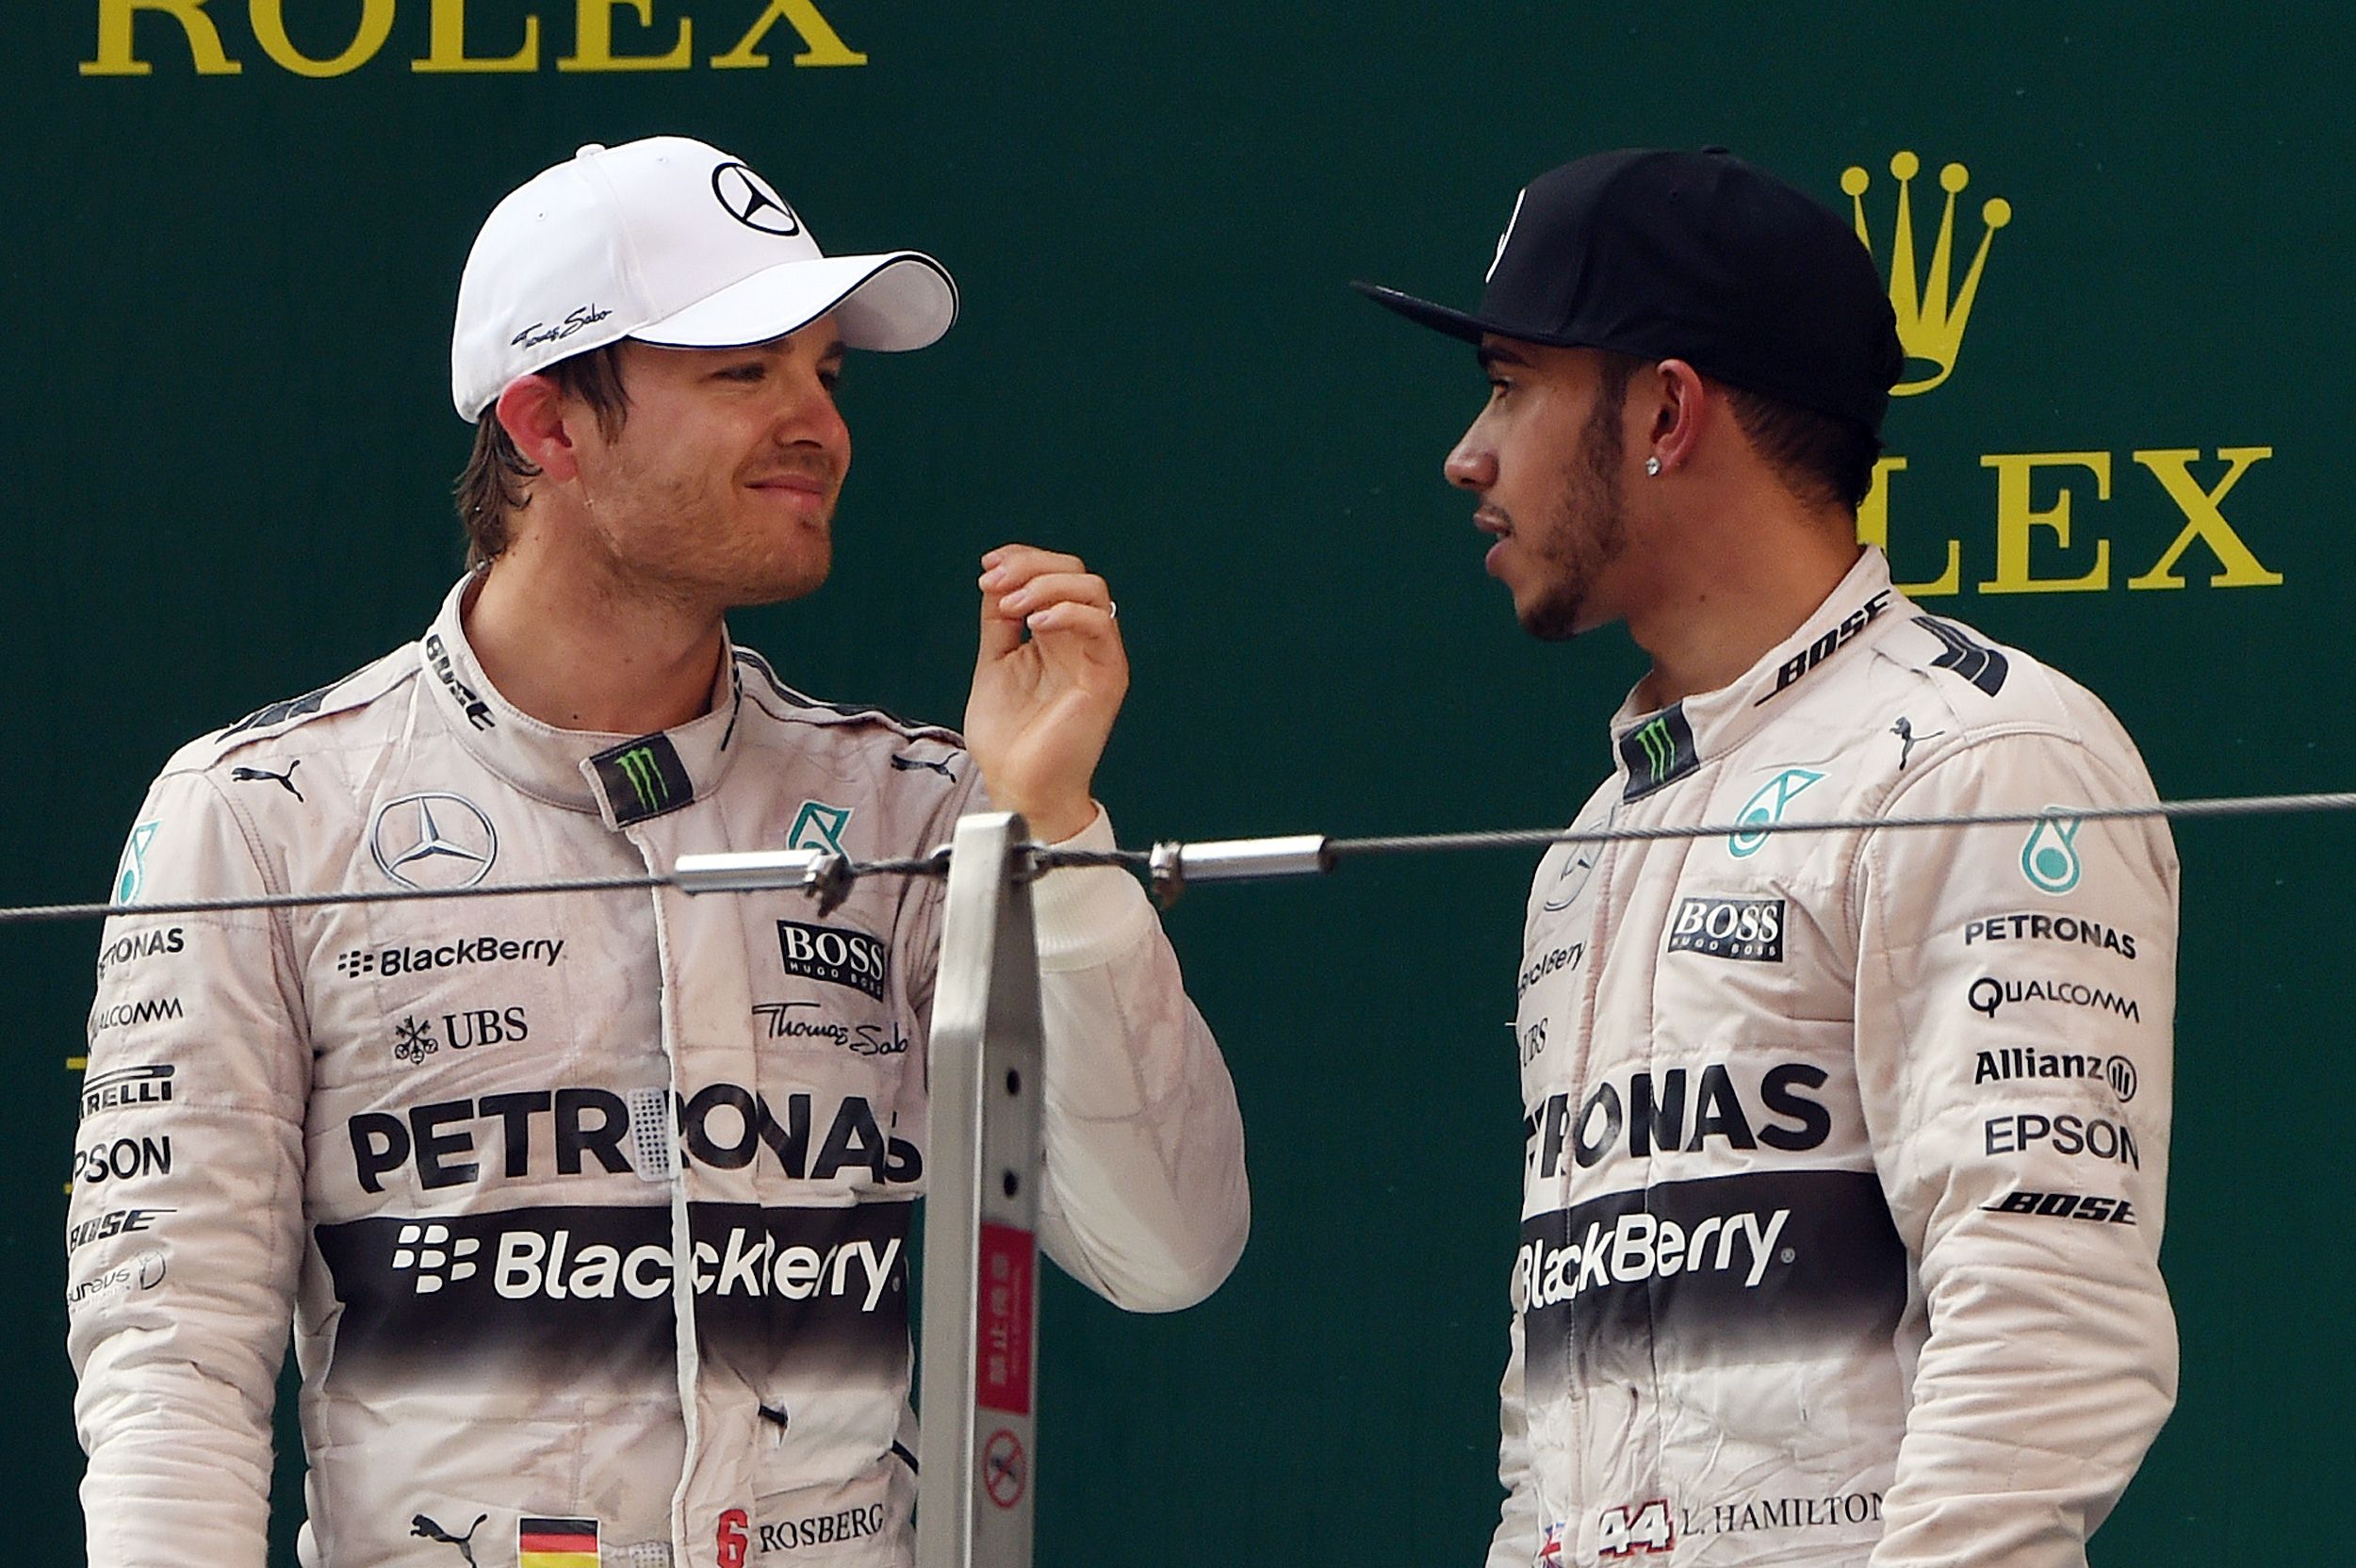 Lewis Hamilton will renew his rivalry with Mercedes teammate Nico Rosberg in the Bahrain desert this weekend. Photo: AFP